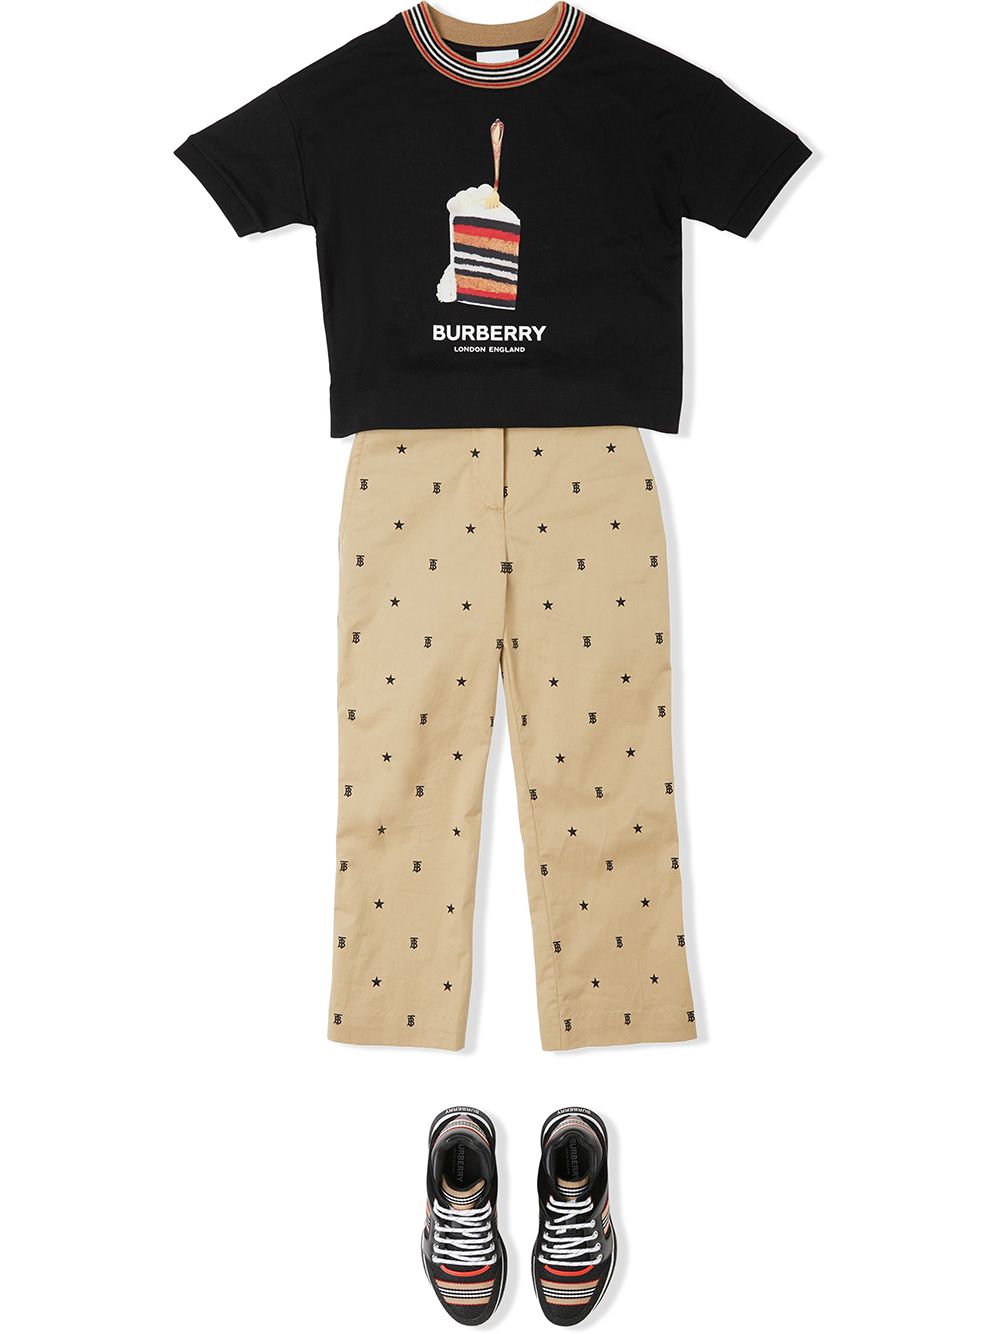 Shop Burberry Kids Cake print T-shirt with Express Delivery - FARFETCH